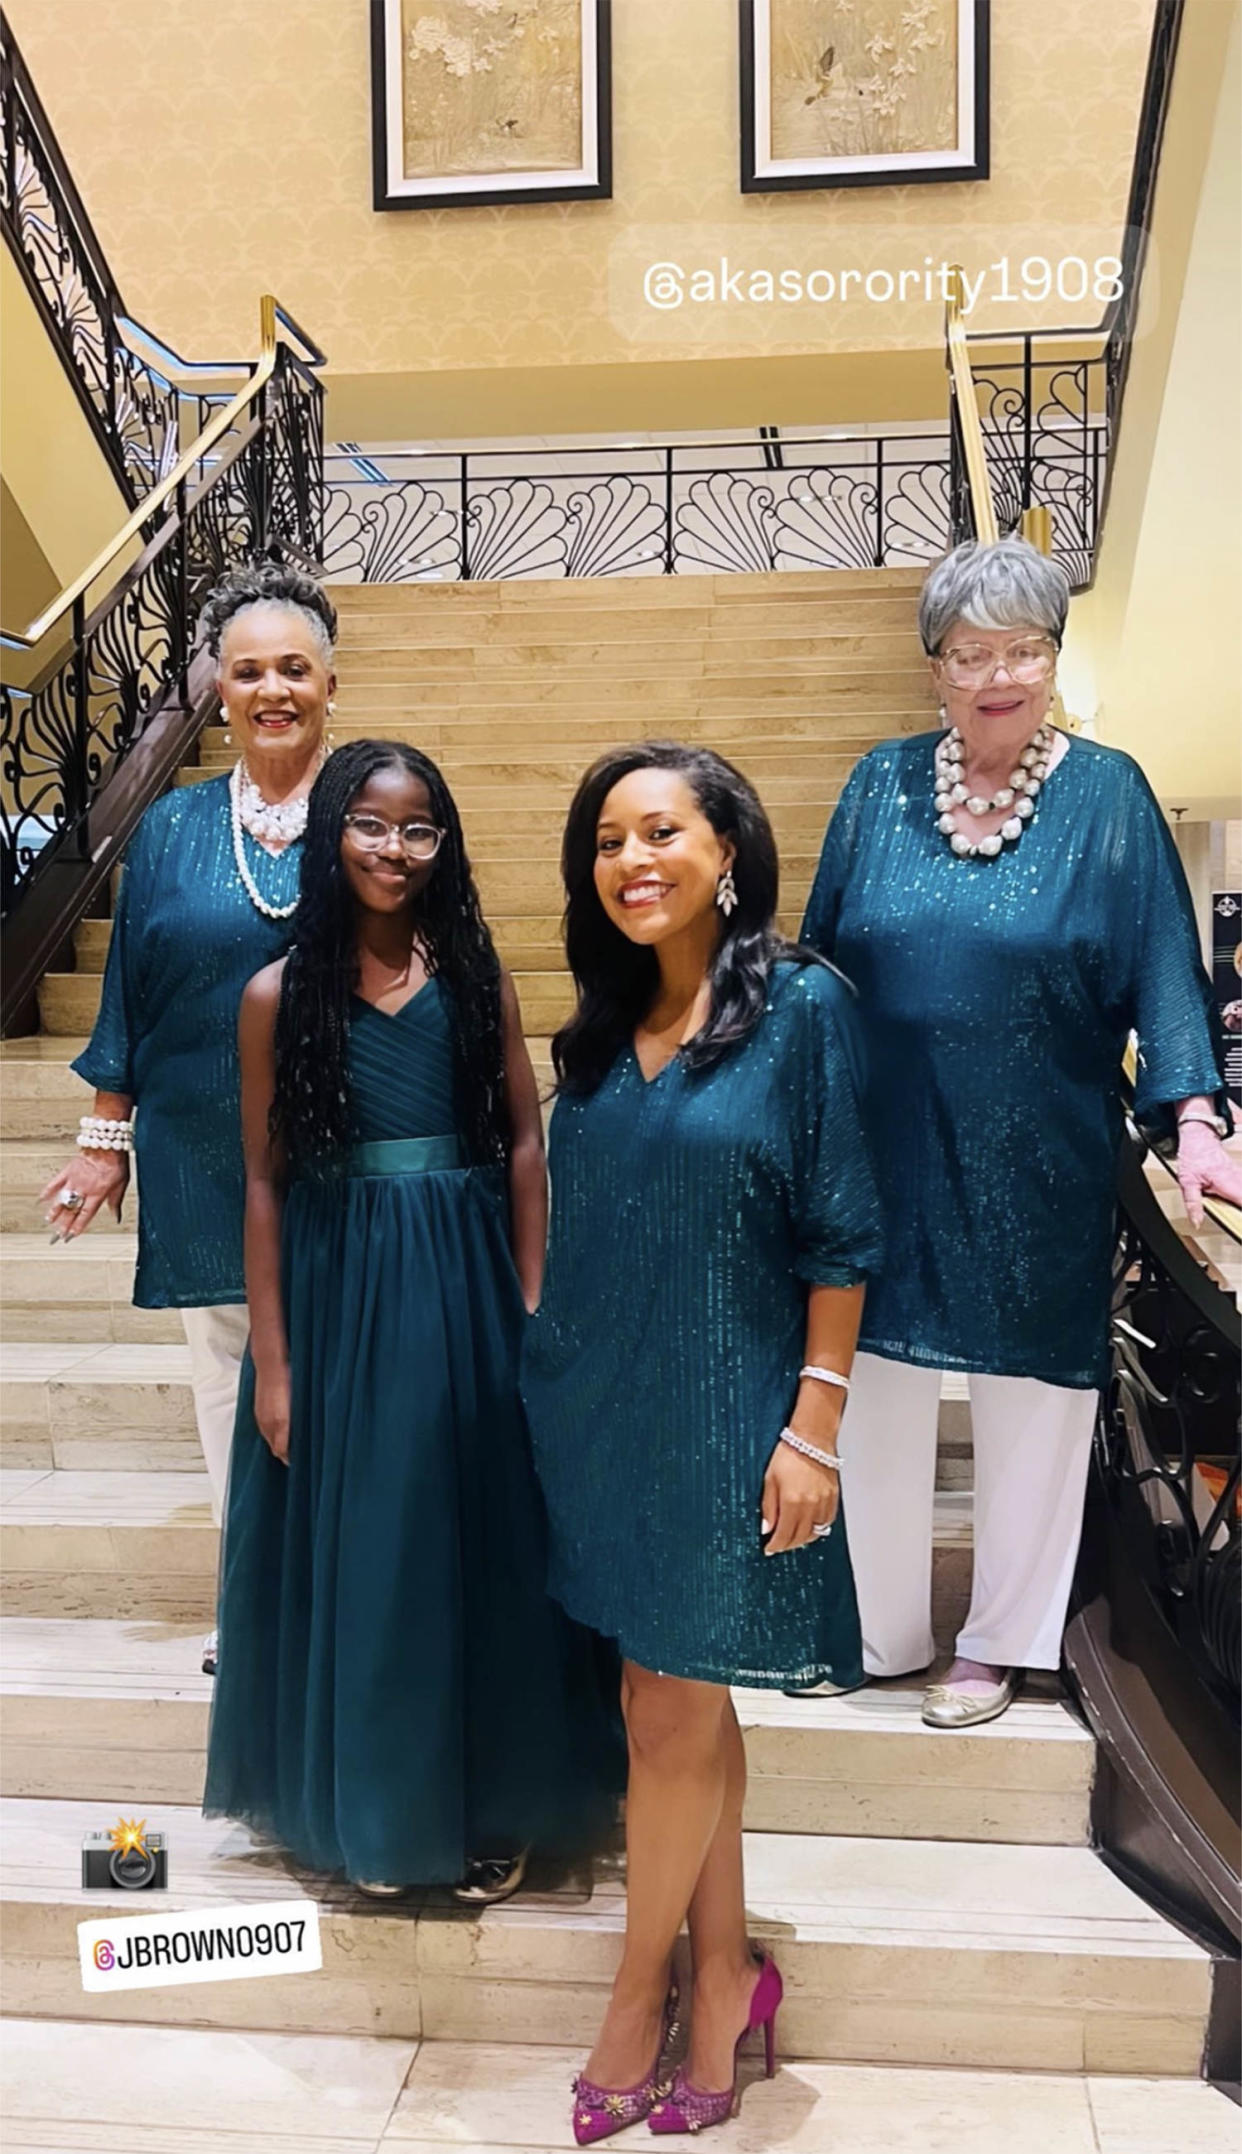 Sheinelle Jones and her family all wore coordinating ensembles for an AKA sorority legacy event. (Sheinelle Jones / Instagram)